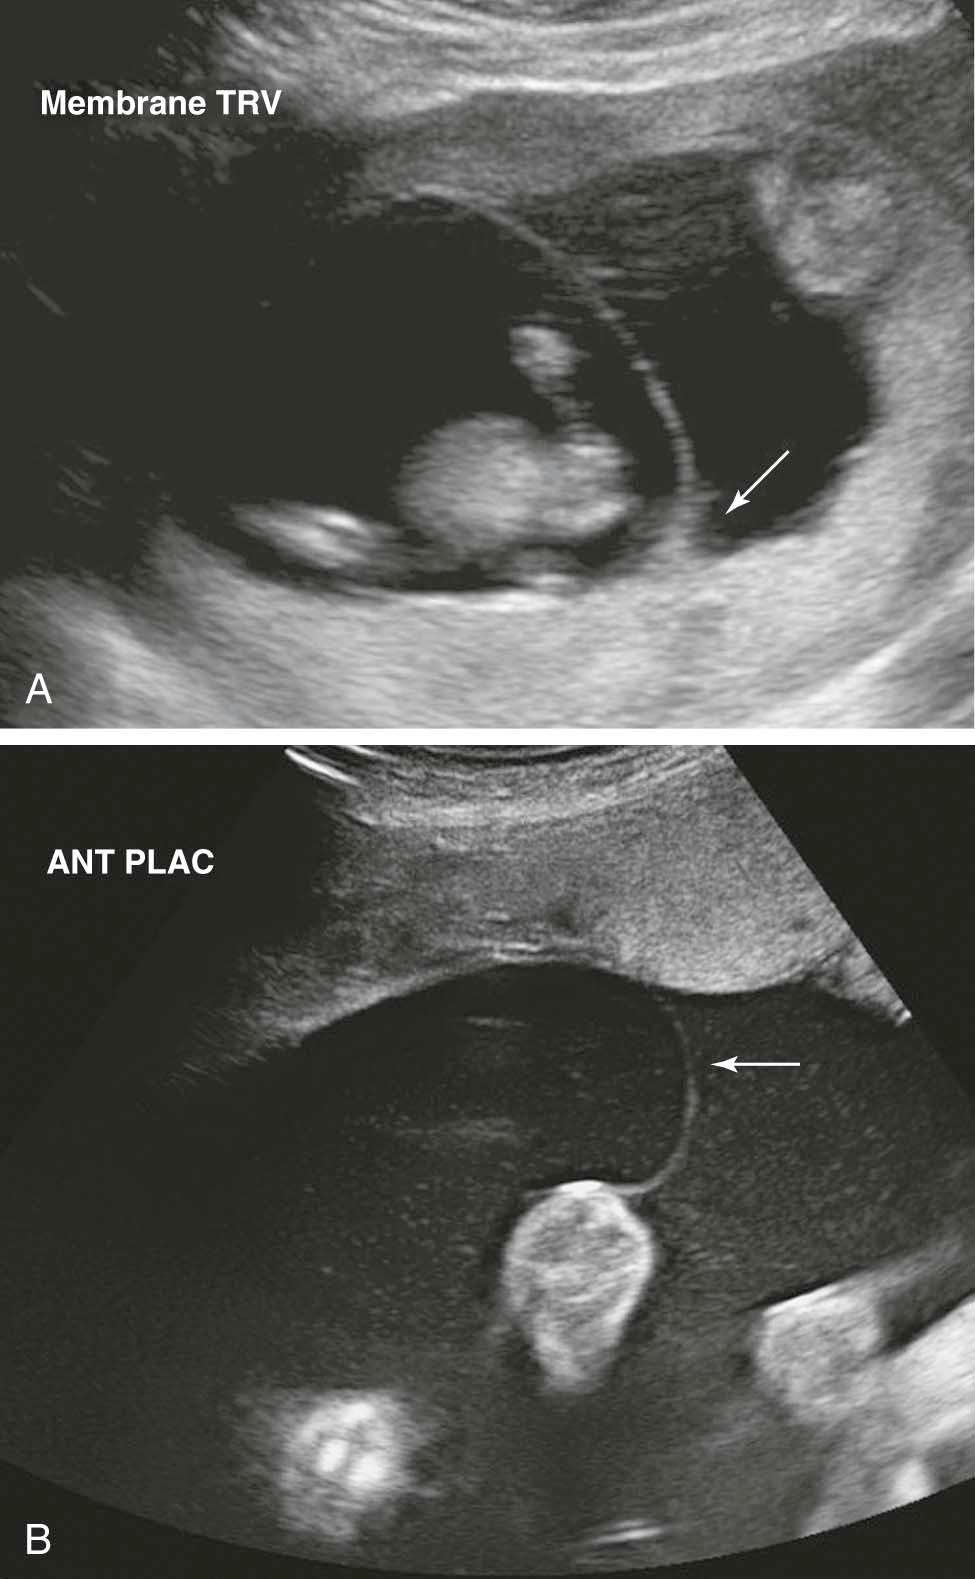 FIGURE 13-2, A, Real-time ultrasound with a thick vertical amnion-chorion septum (membrane) separating one twin (left side) from the second twin on the right. The arrow (right) points to a “peak” or “inverted V” suggesting dizygotic twins. B, Ultrasound of a thin vertical membrane separating one twin on the left side from the second twin on the right suggesting a monochorionic gestational sack. ANT PLAC , Anterior placenta; TRV , transverse view of membrane.